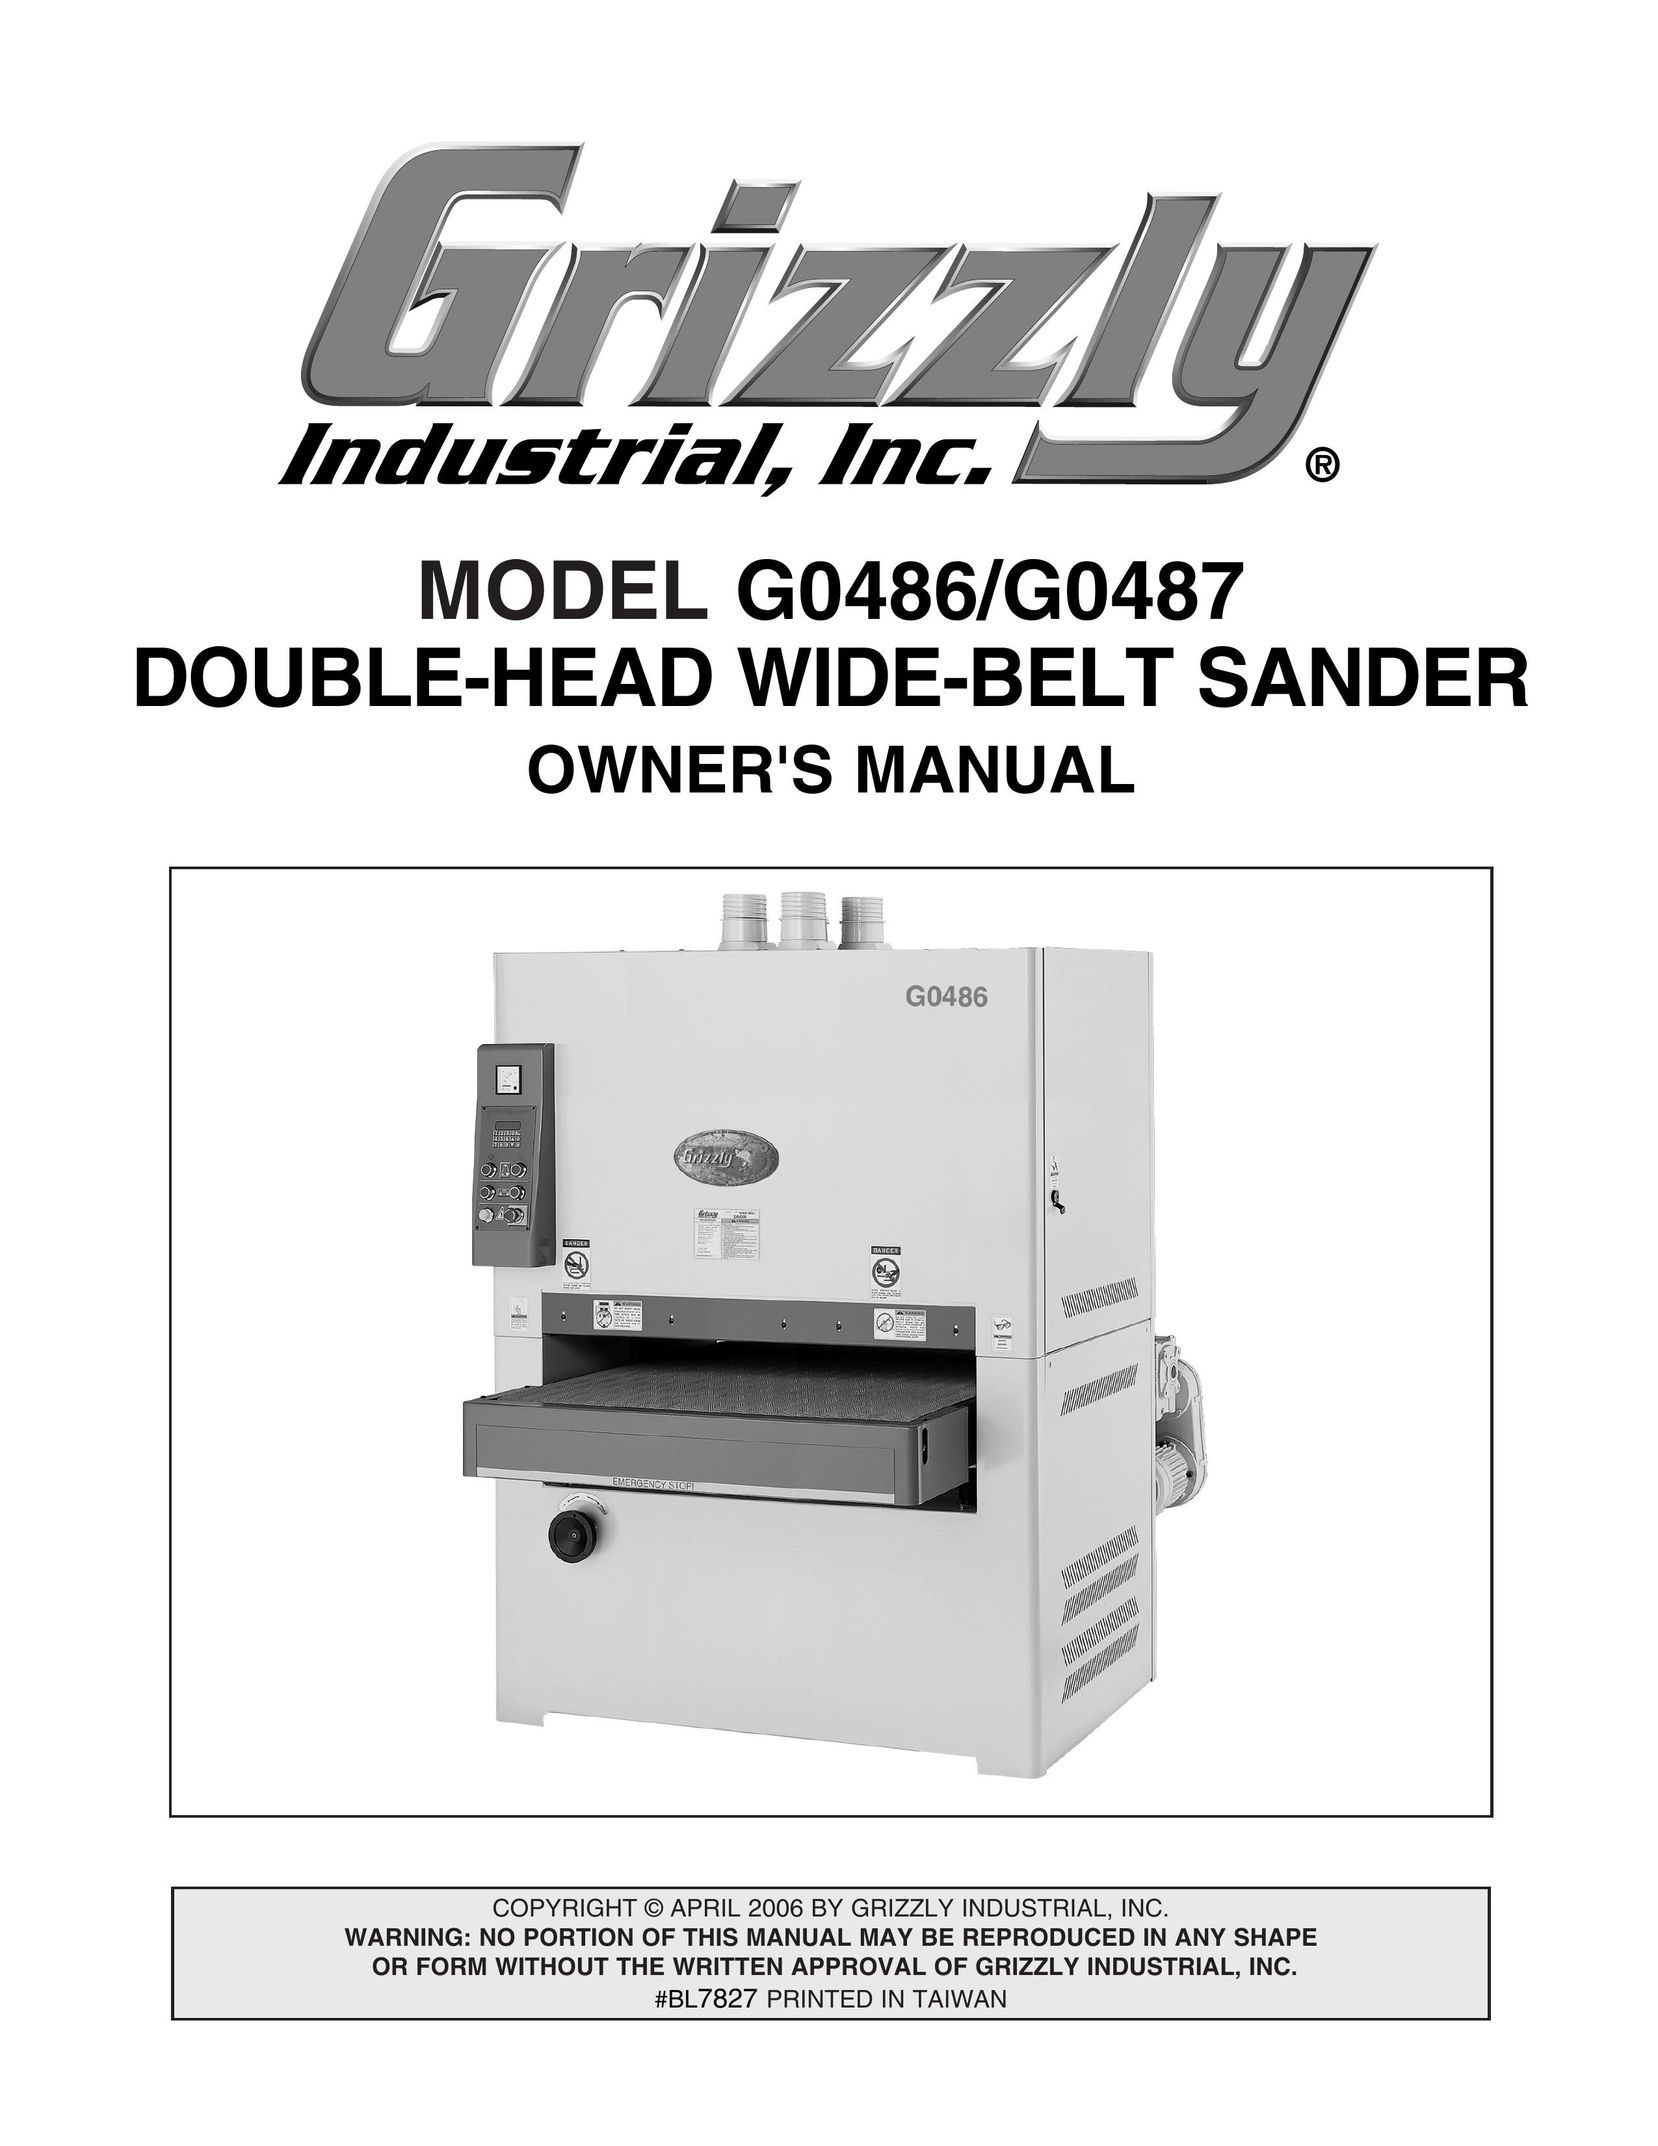 Grizzly G0486/G0487 Sander User Manual